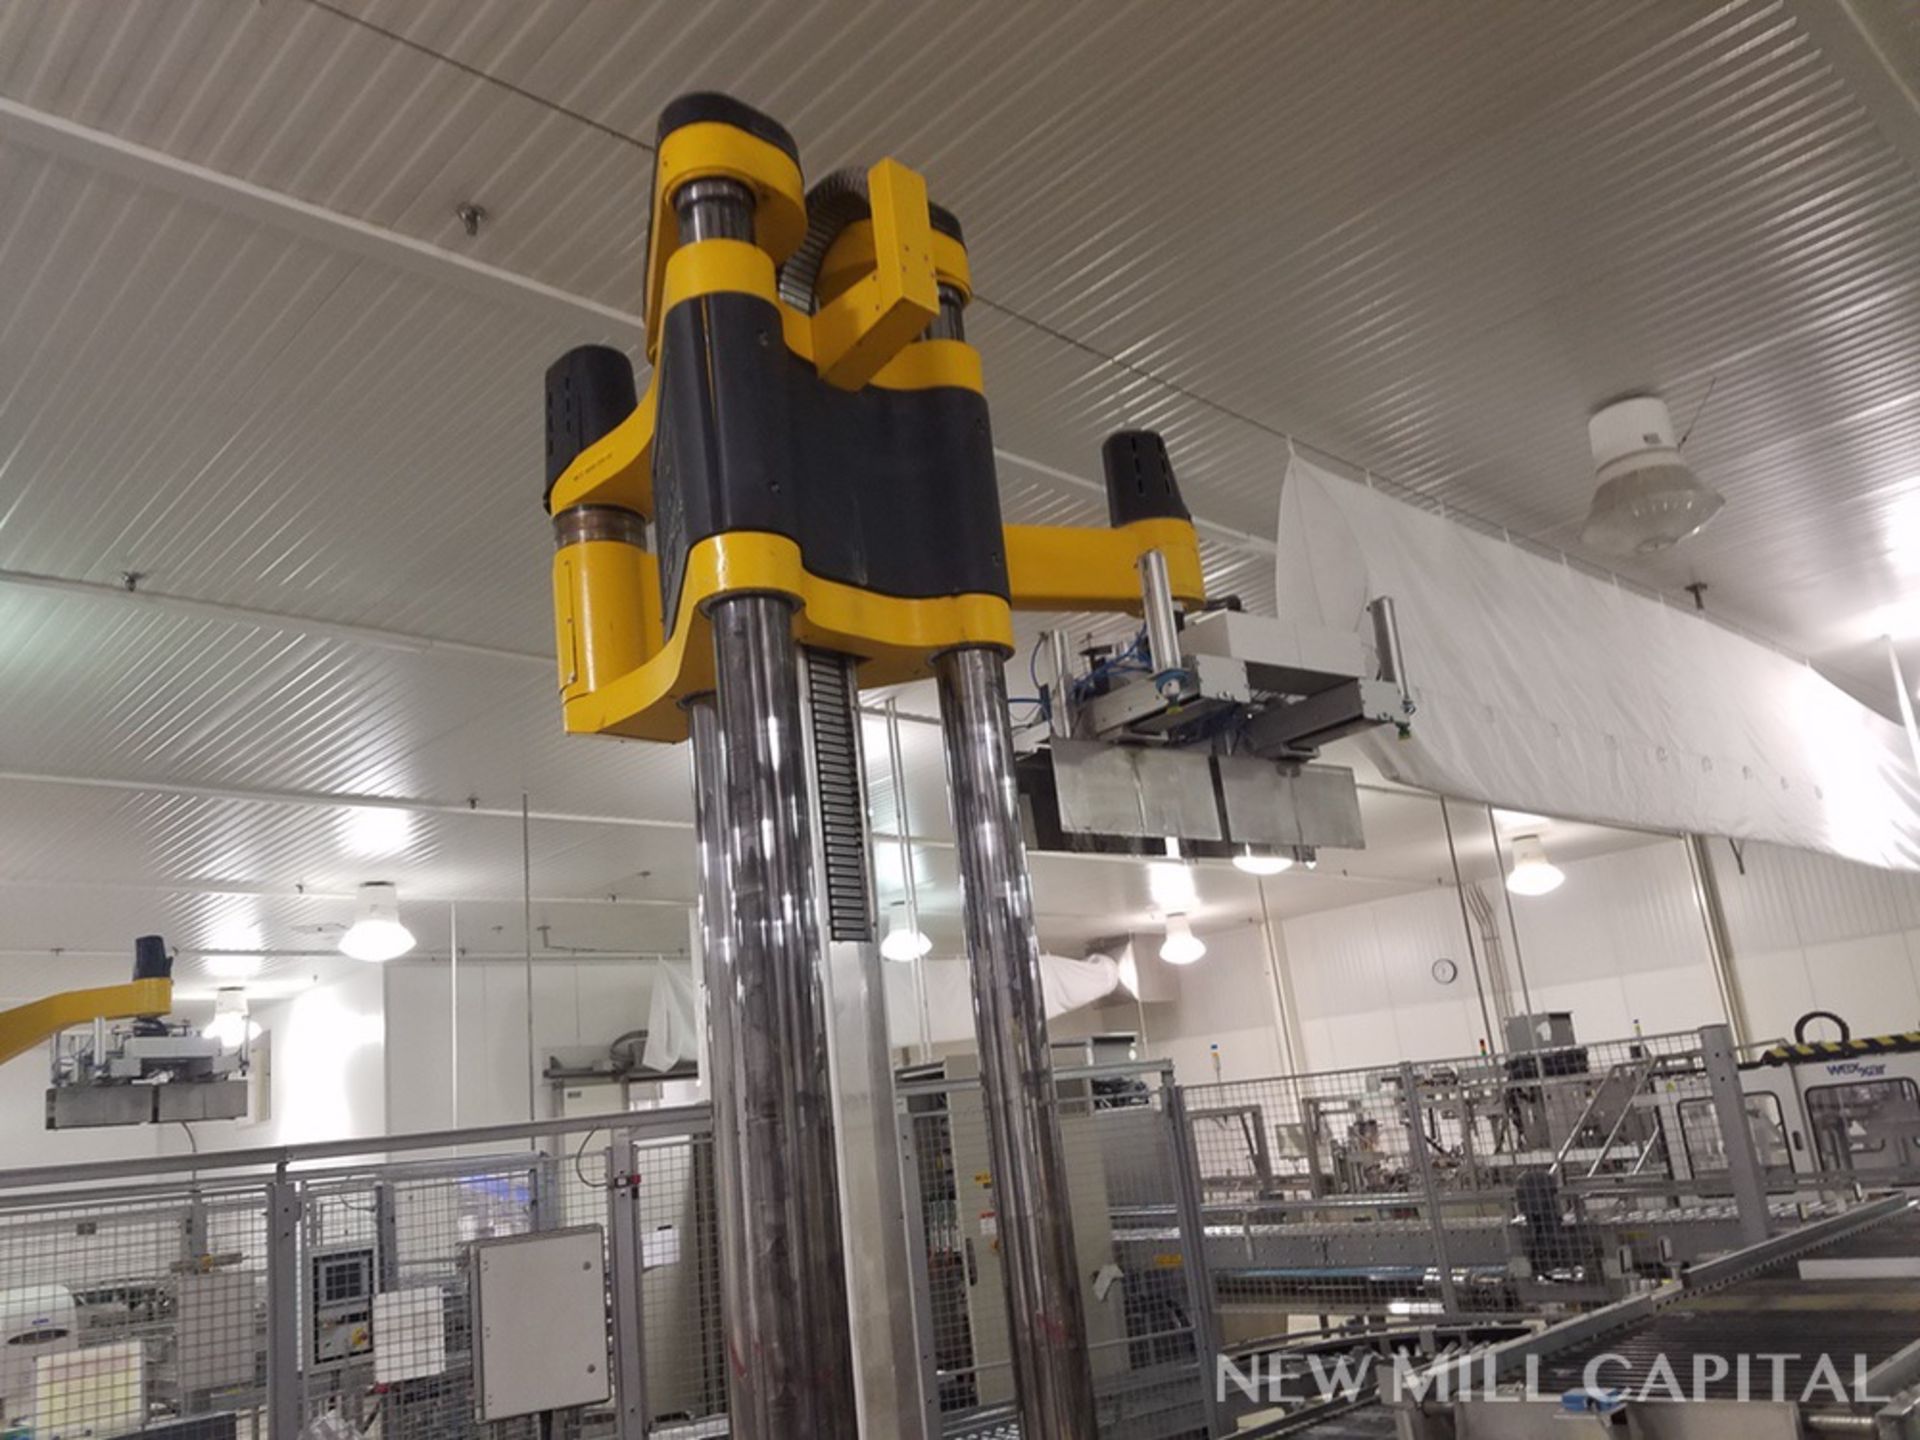 Skilled 504 Palletizing Robot | Contact Rigger for Pricing - Image 8 of 13